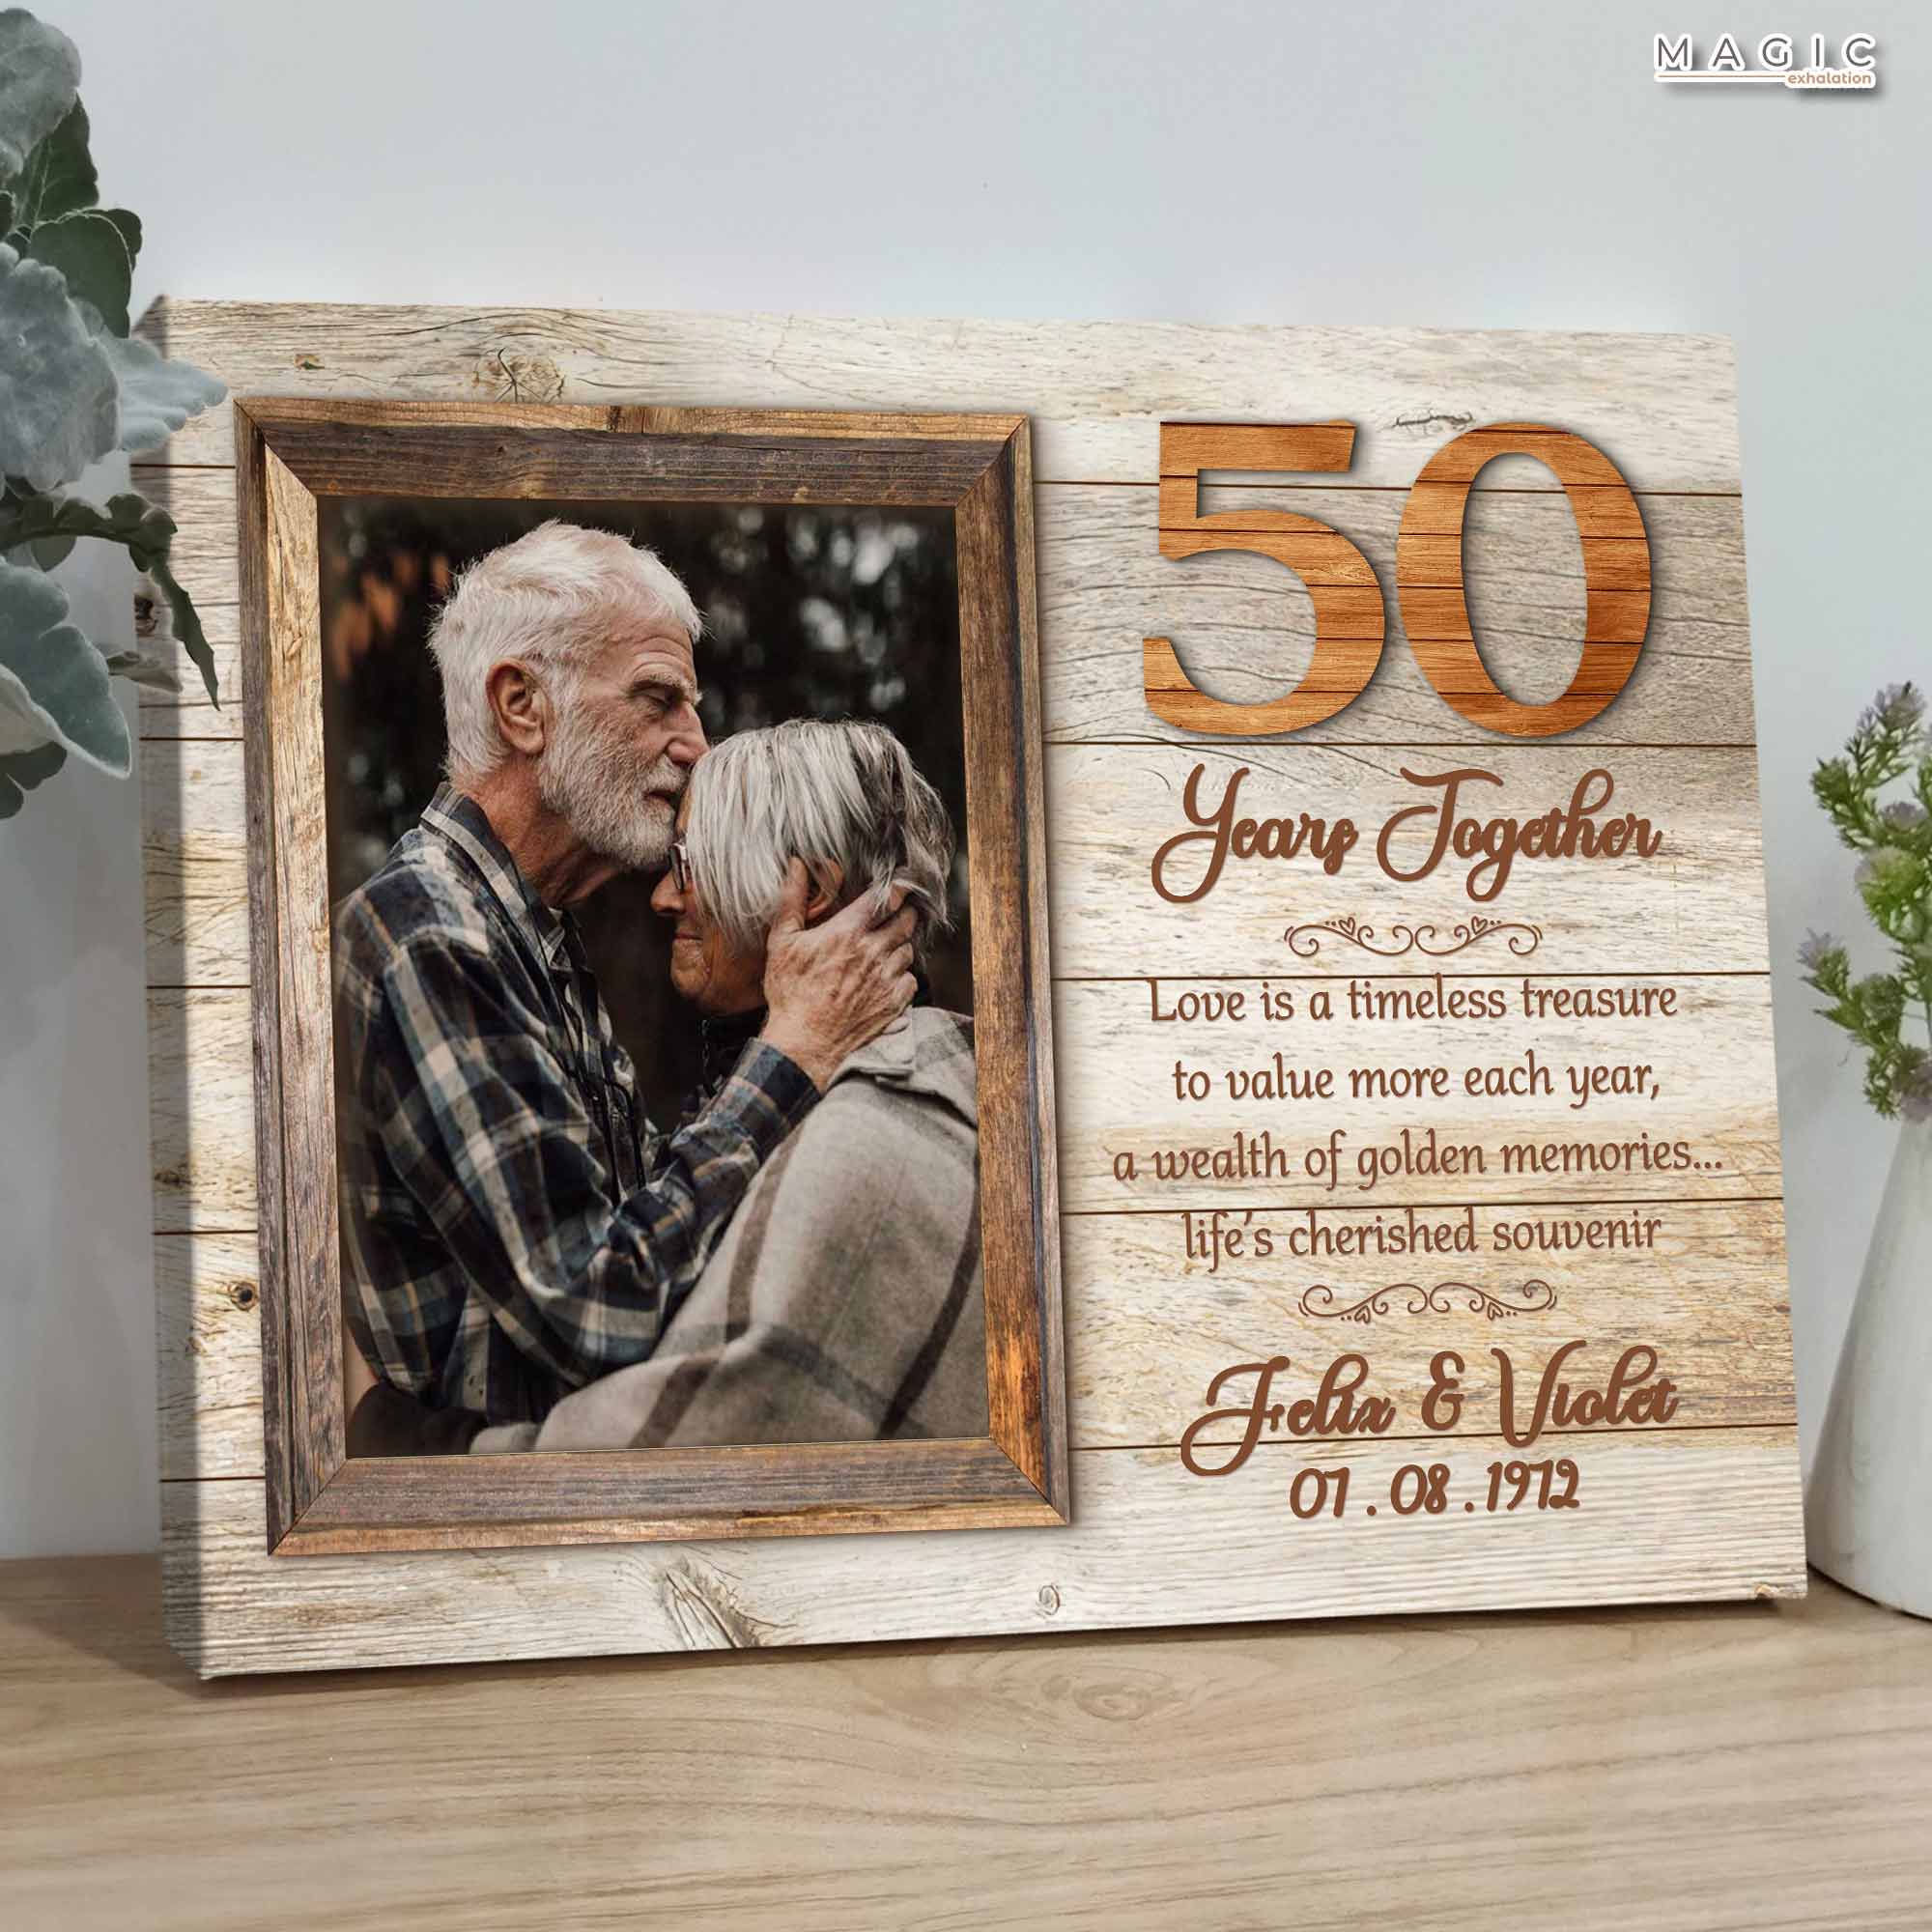 last minute 50th wedding anniversary gifts, good anniversary gifts for parents